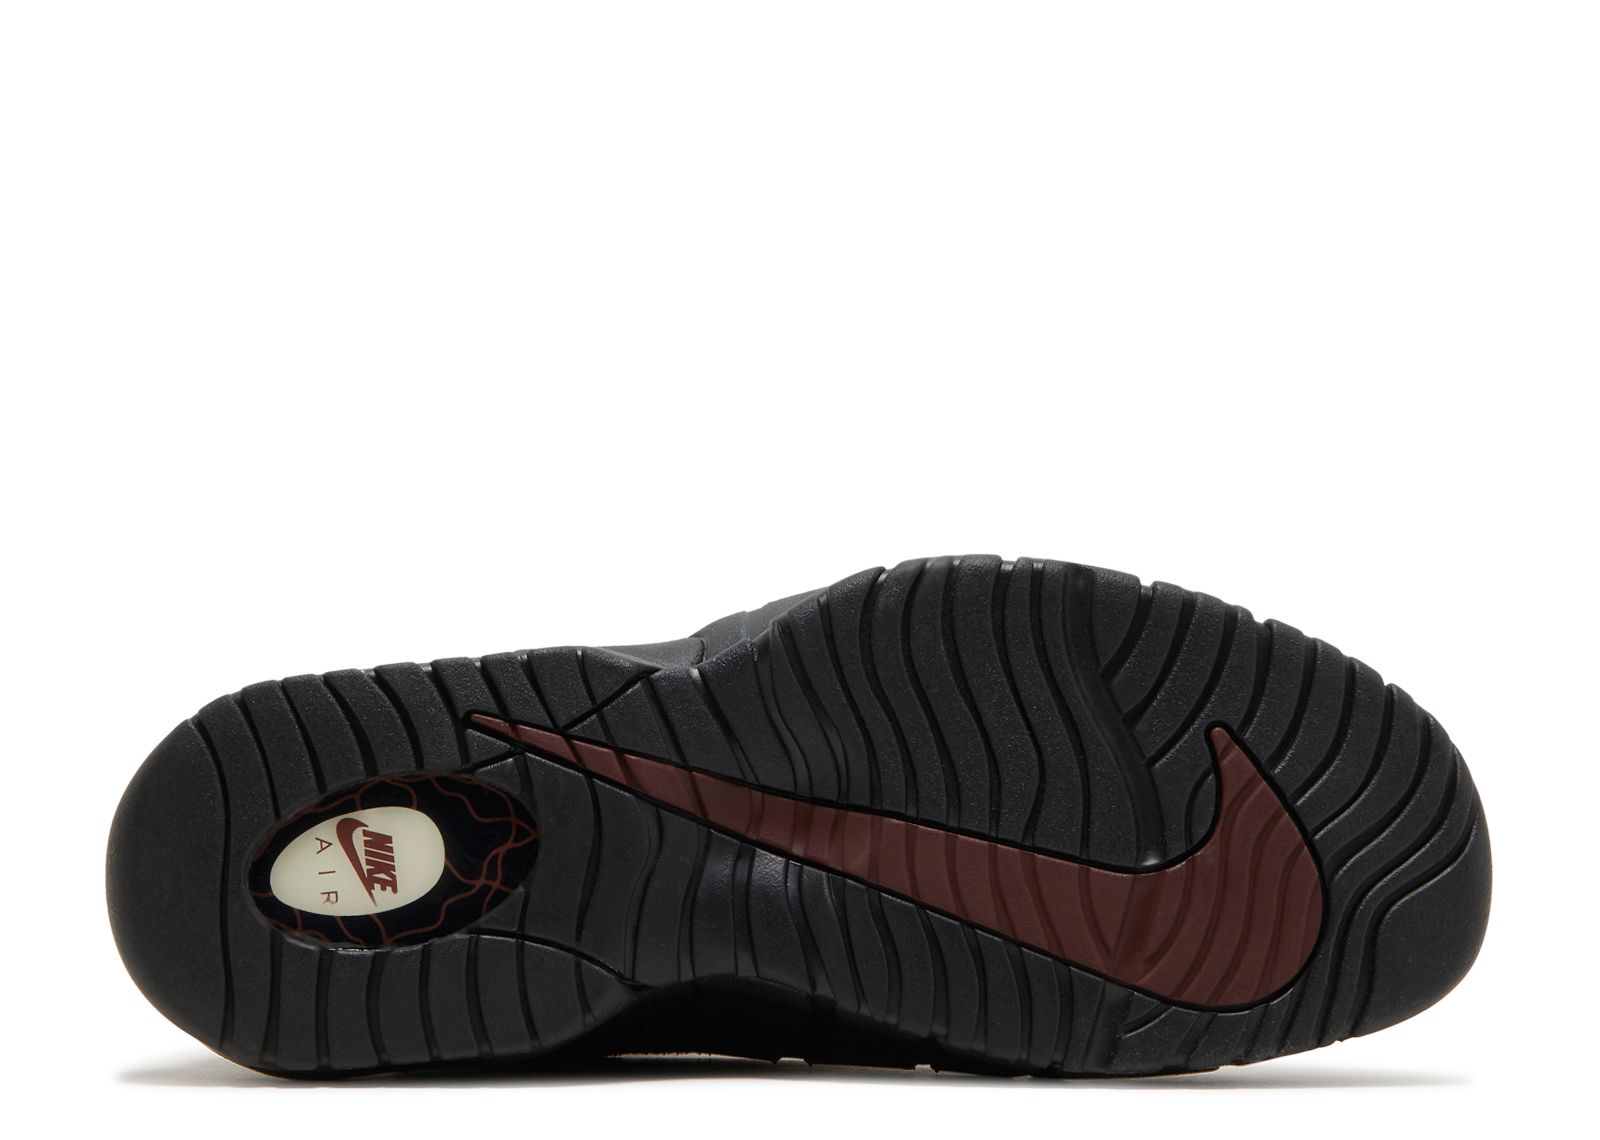 Air Max Penny 1 'Faded Spruce' - Nike - DV7442 001 - black/faded